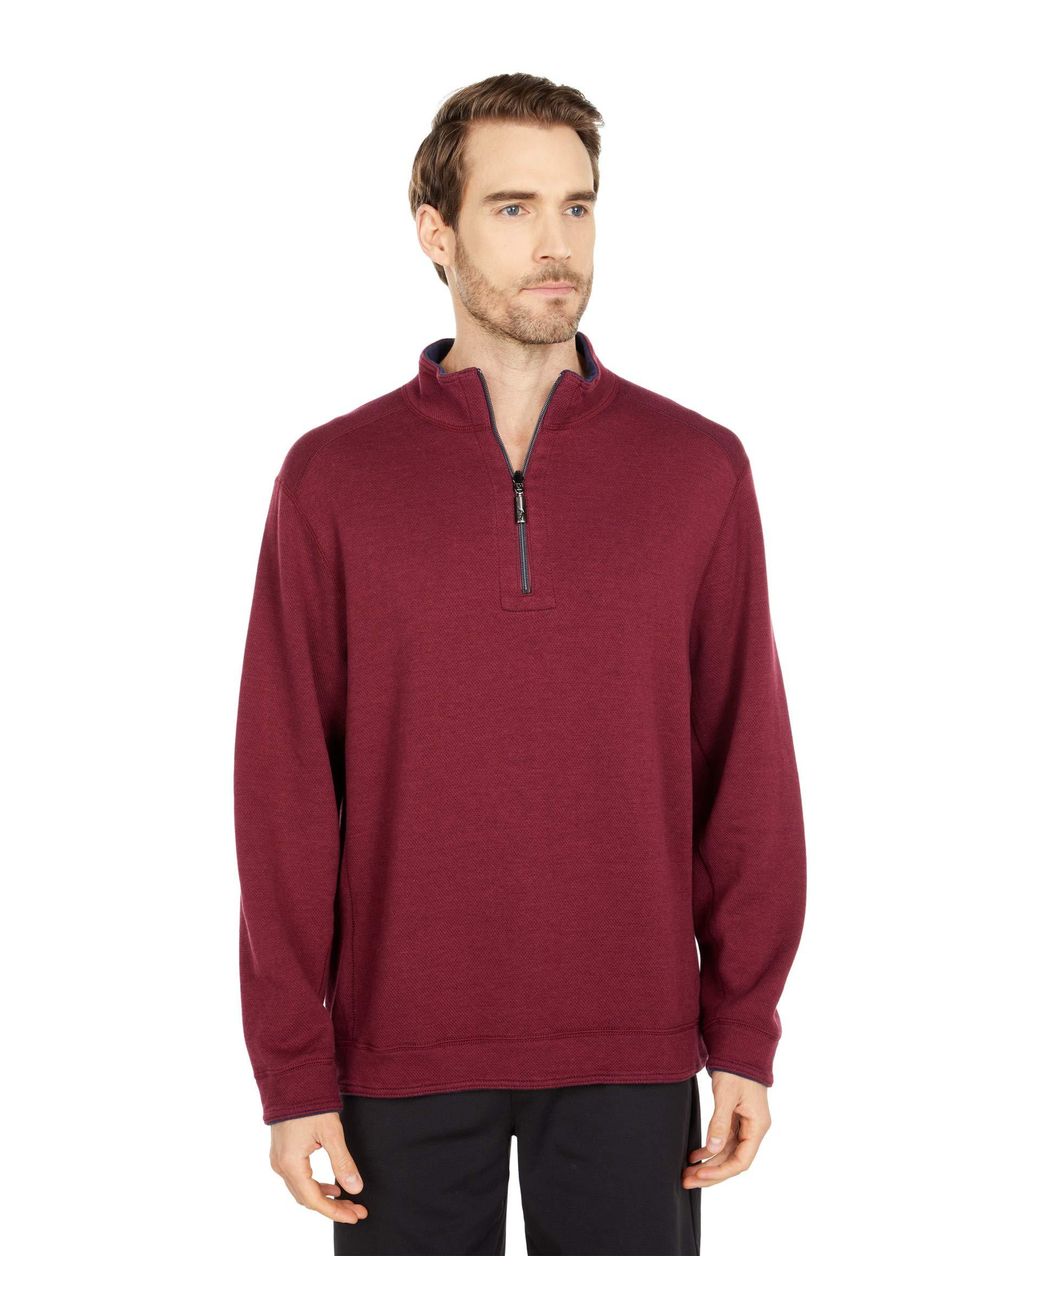 Tommy Bahama Cotton Flipshore 1/2 Zip in Burgundy (Red) for Men - Lyst